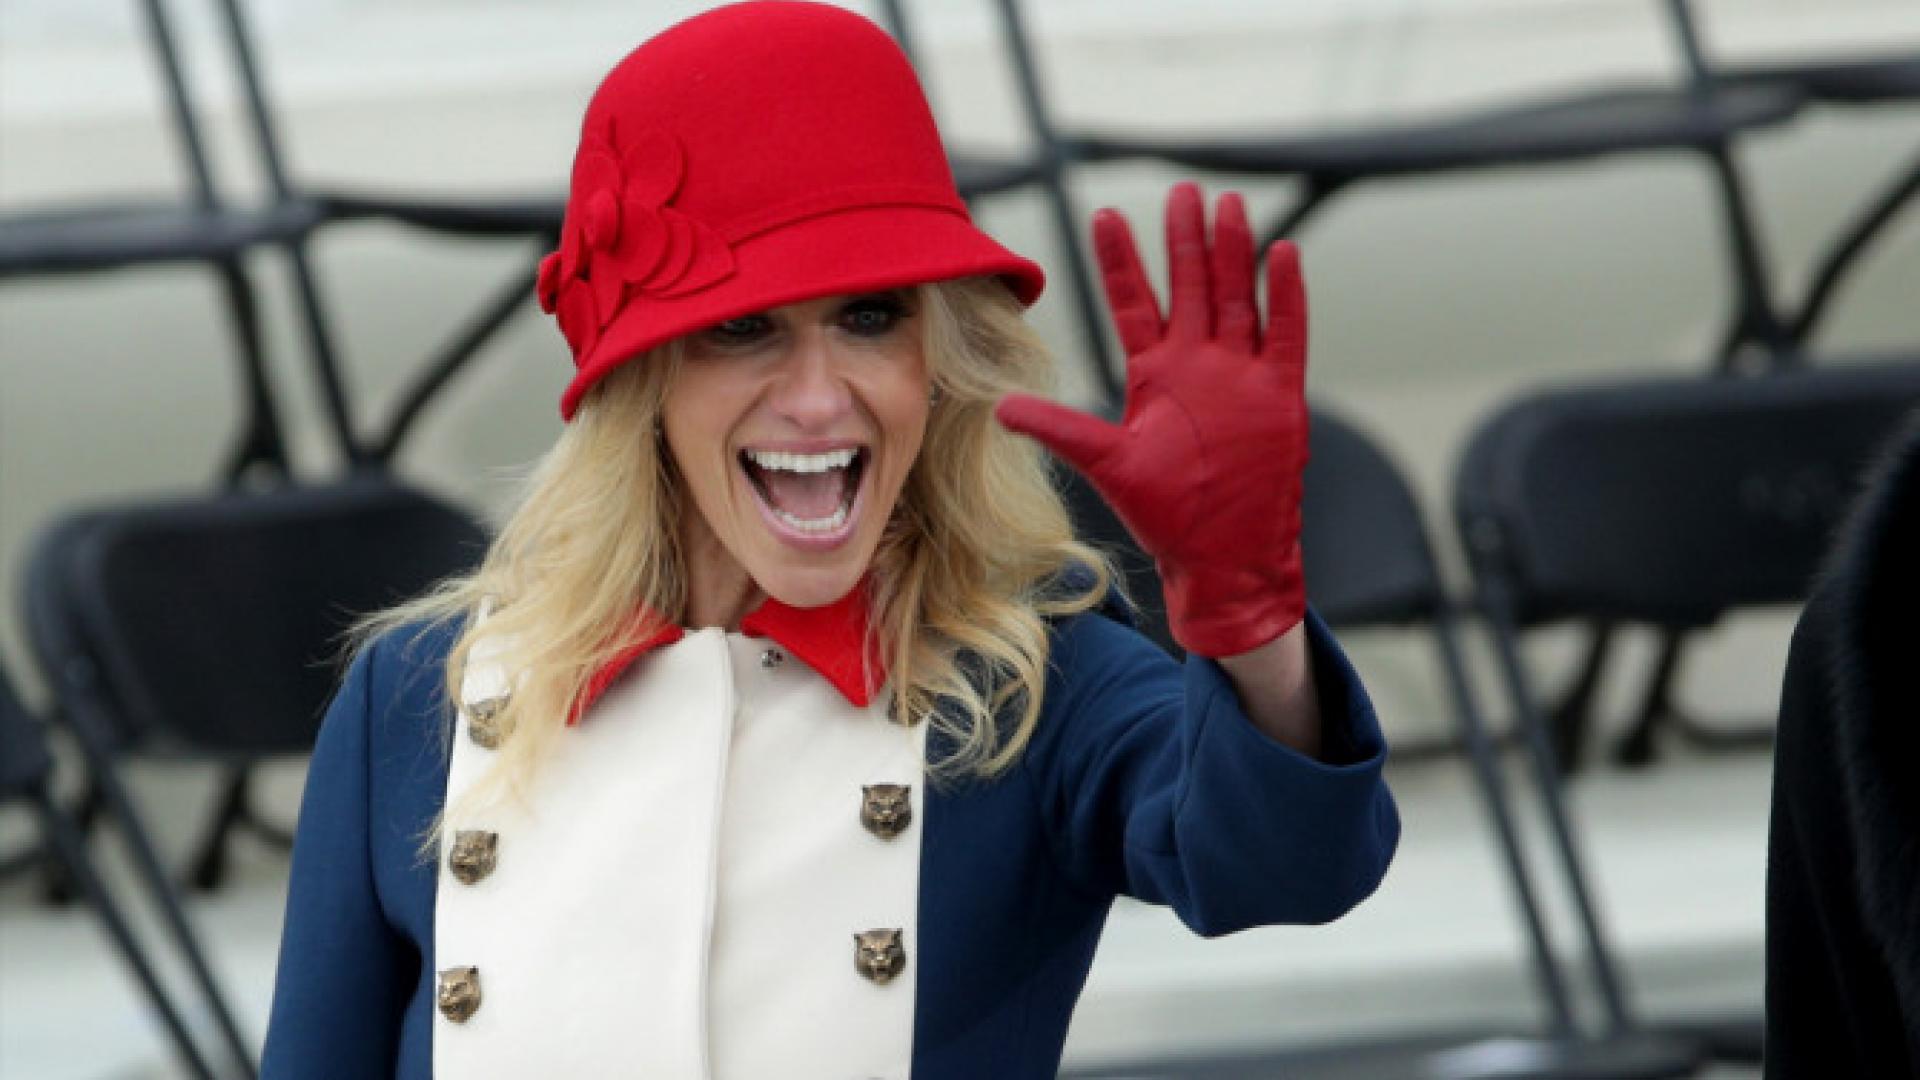 The Adviser Strikes Back Kellyanne Conway Digs At Critics Of Her Inauguration Garb Inside Edition